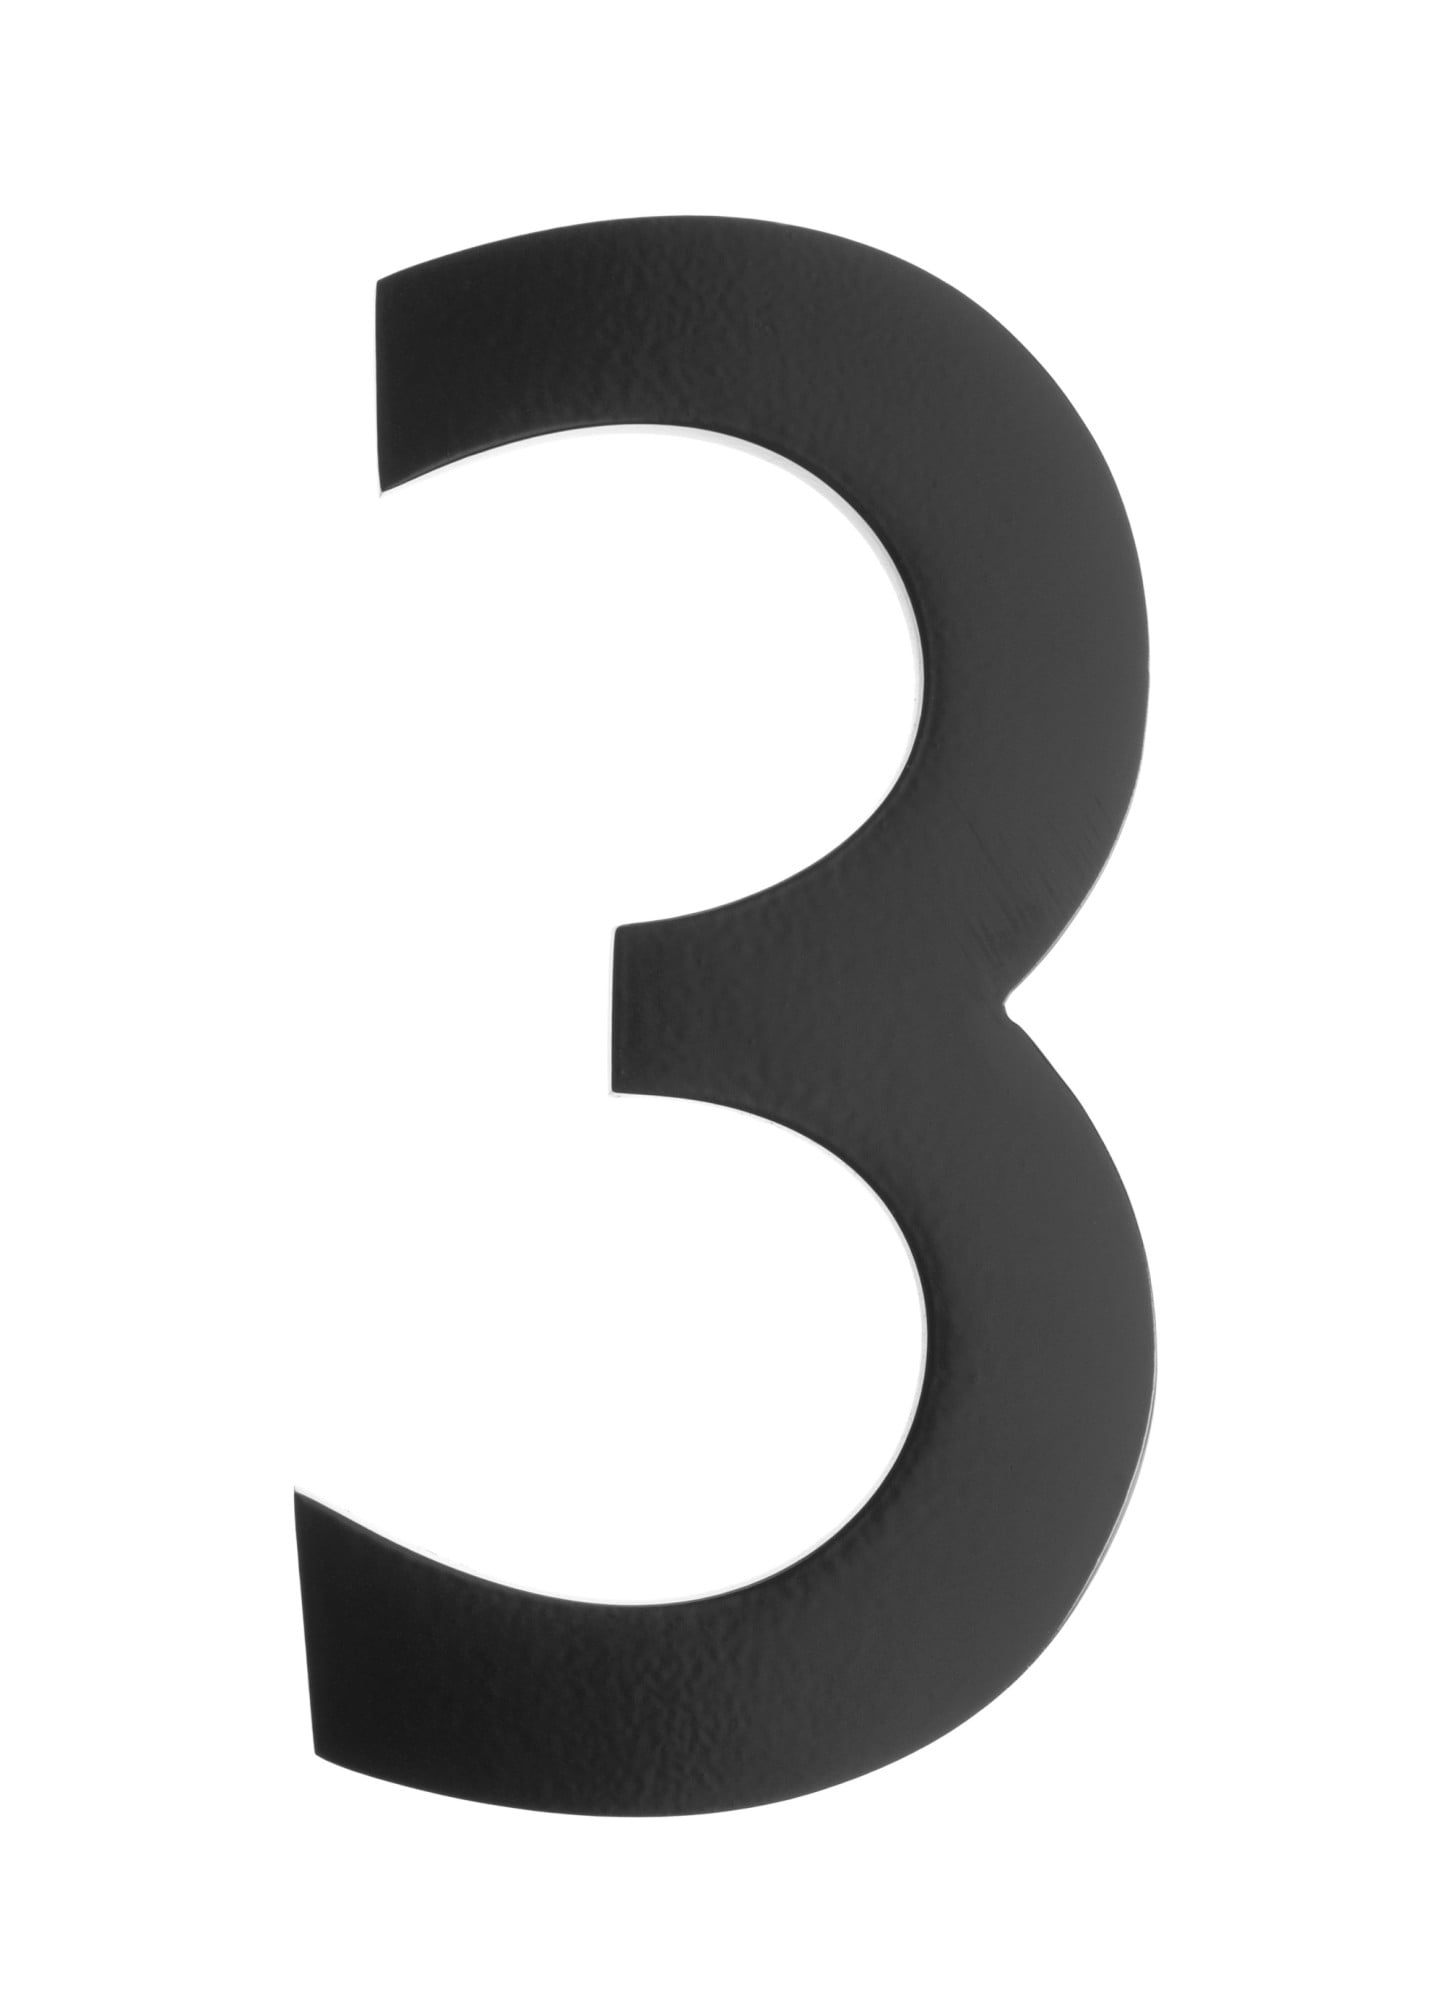 3582b-3 Floating House Number 3, Black - 4 In.